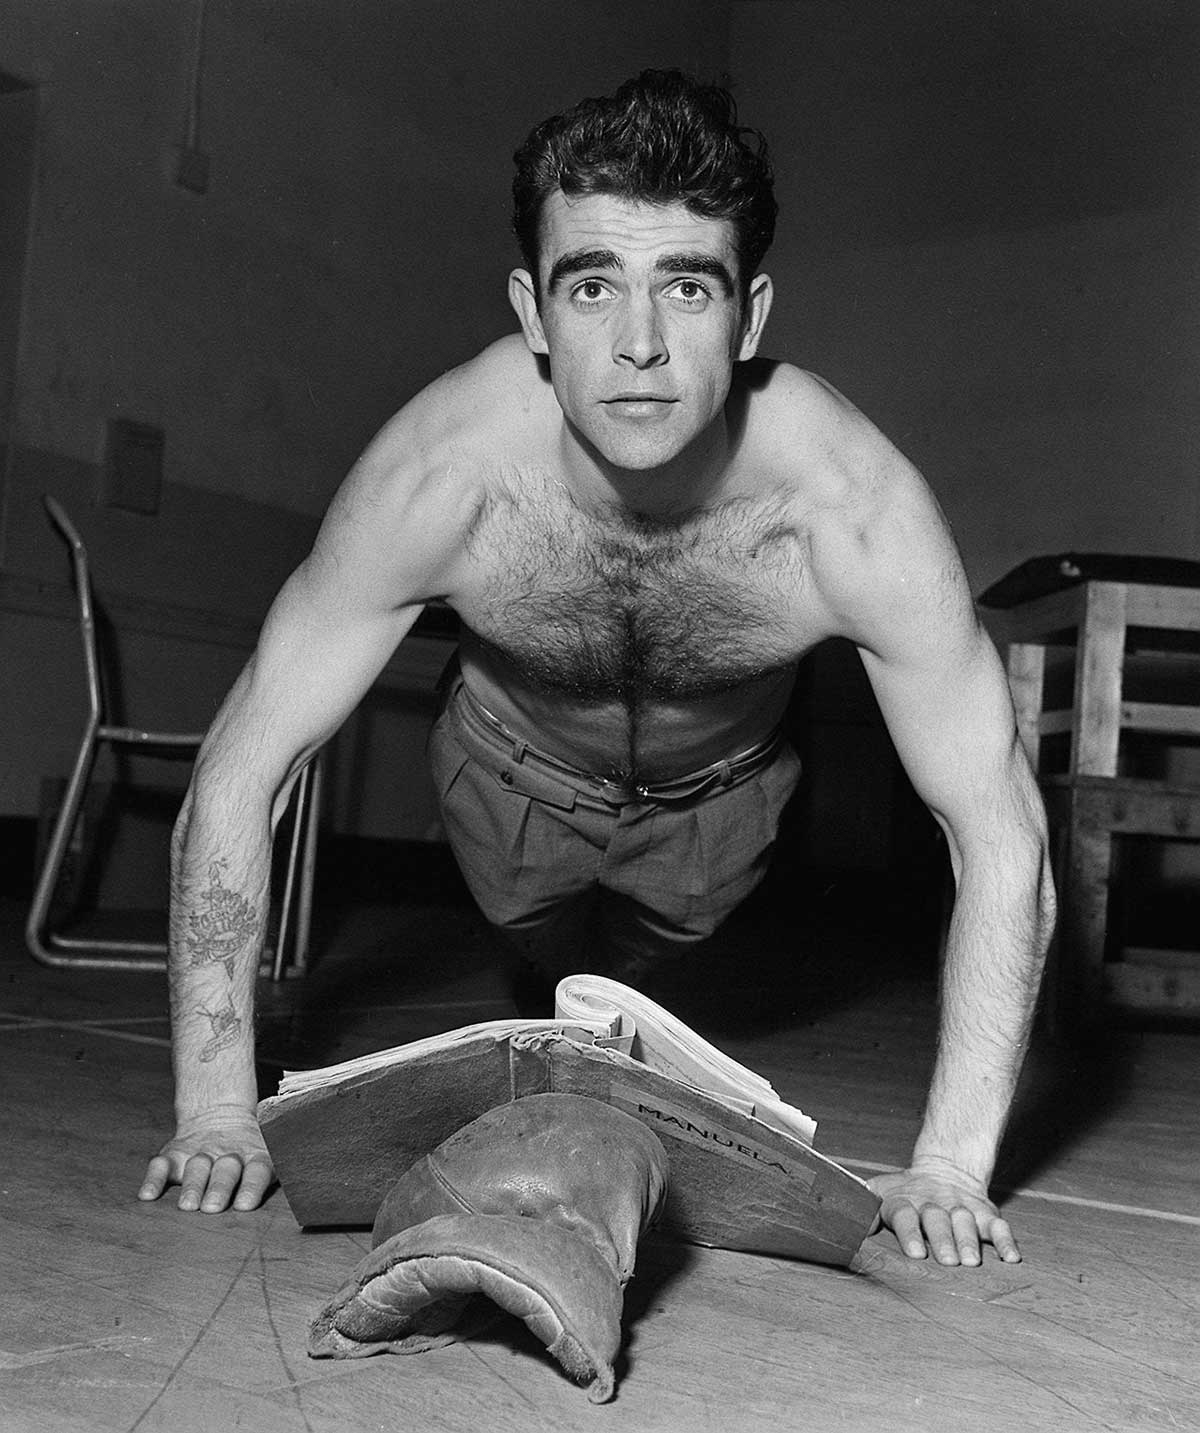 A young Sean Connery showing off for the camera in the mid 1950s.